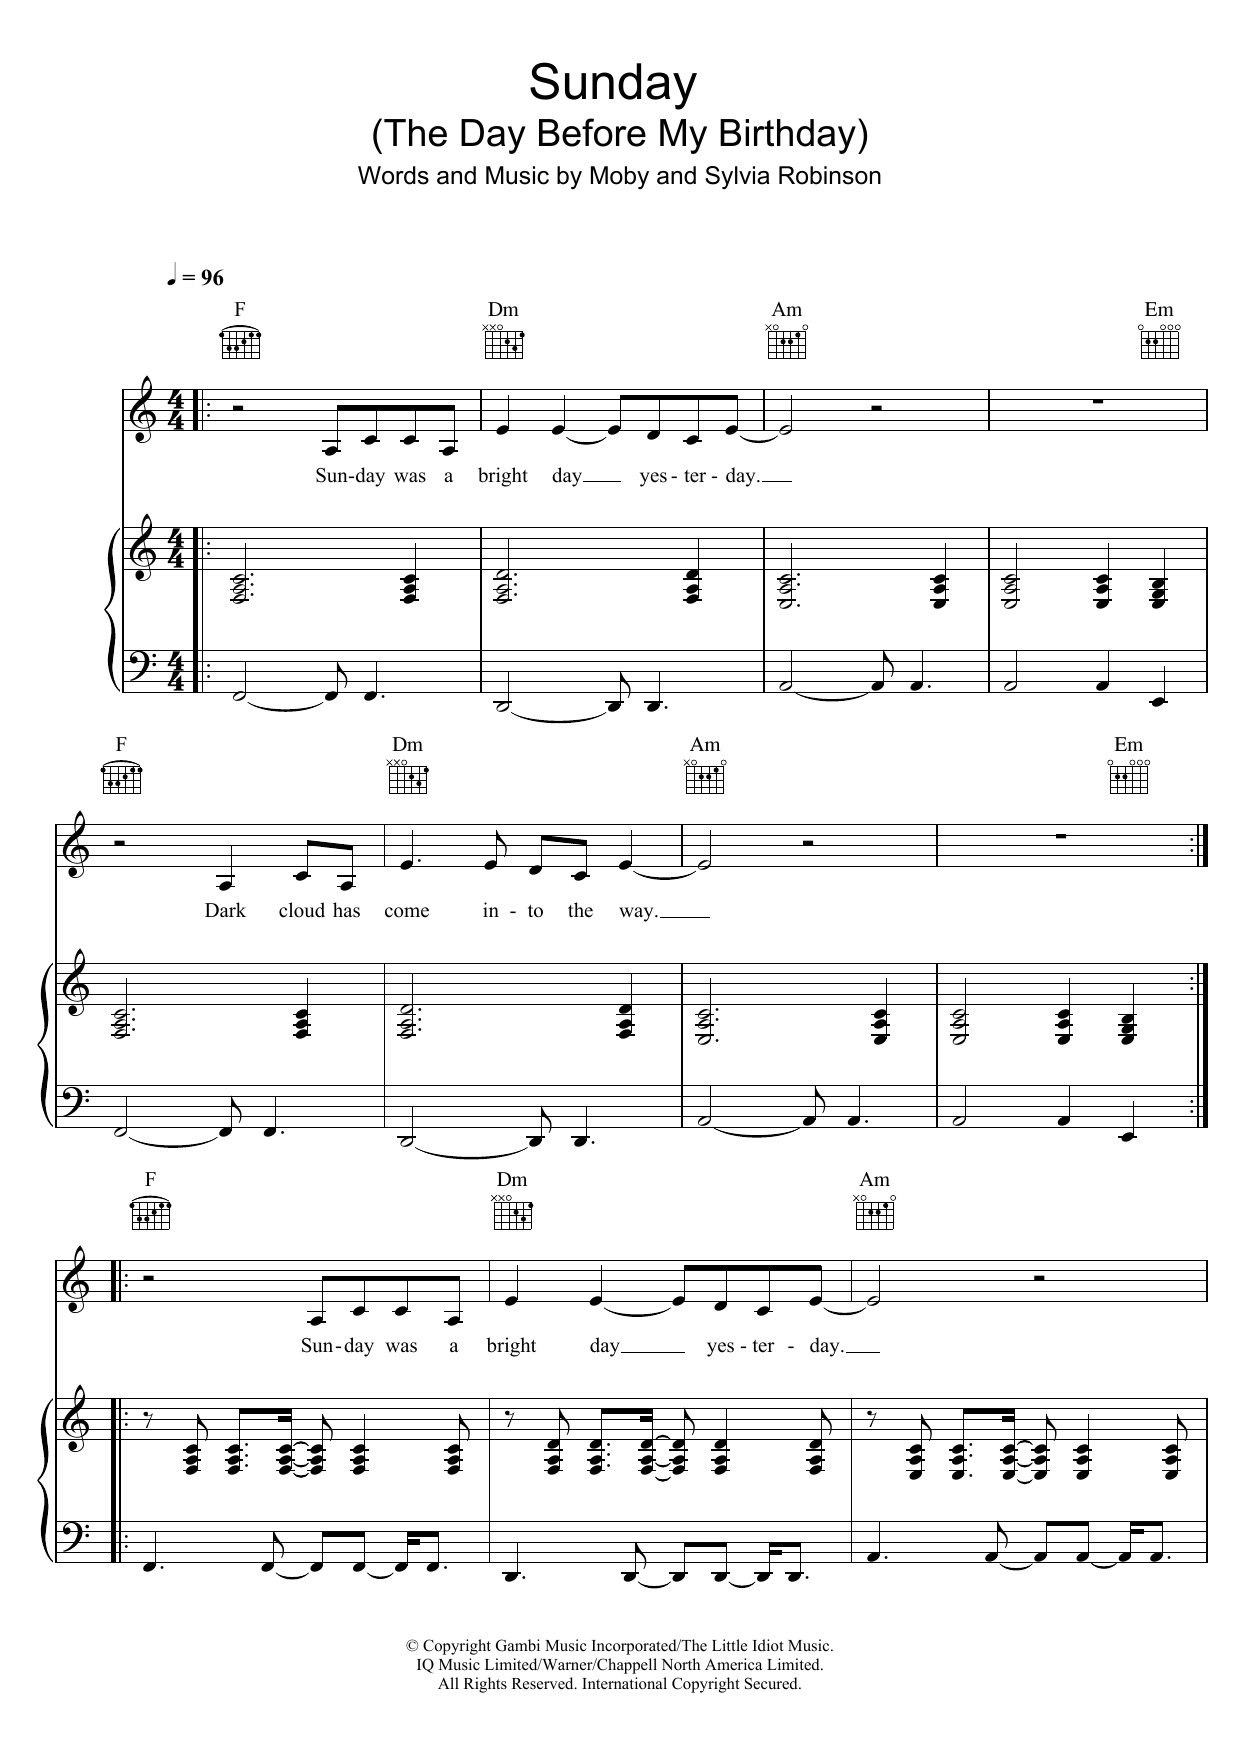 Download Moby Sunday (The Day Before My Birthday) Sheet Music